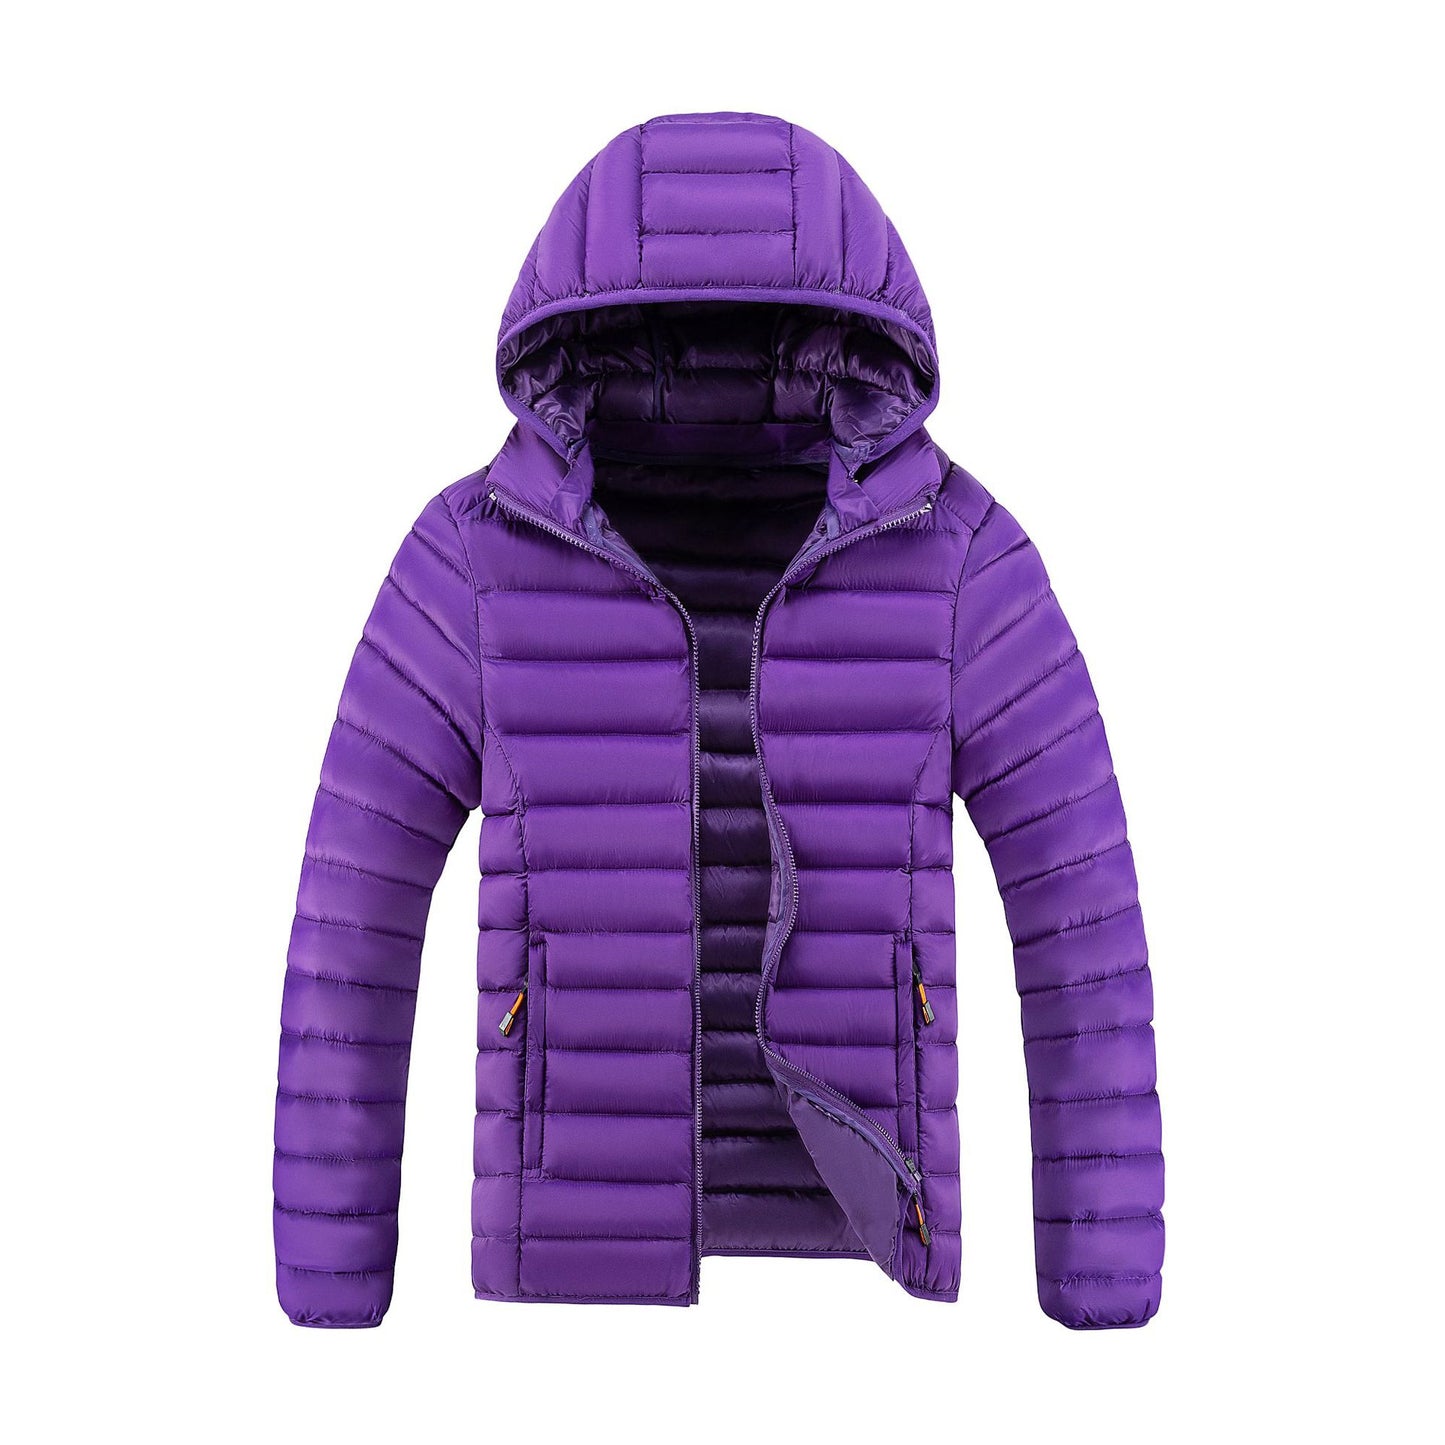 Slim-fit Lightweight Cotton-padded Plus Size Multi-color Down Jacket